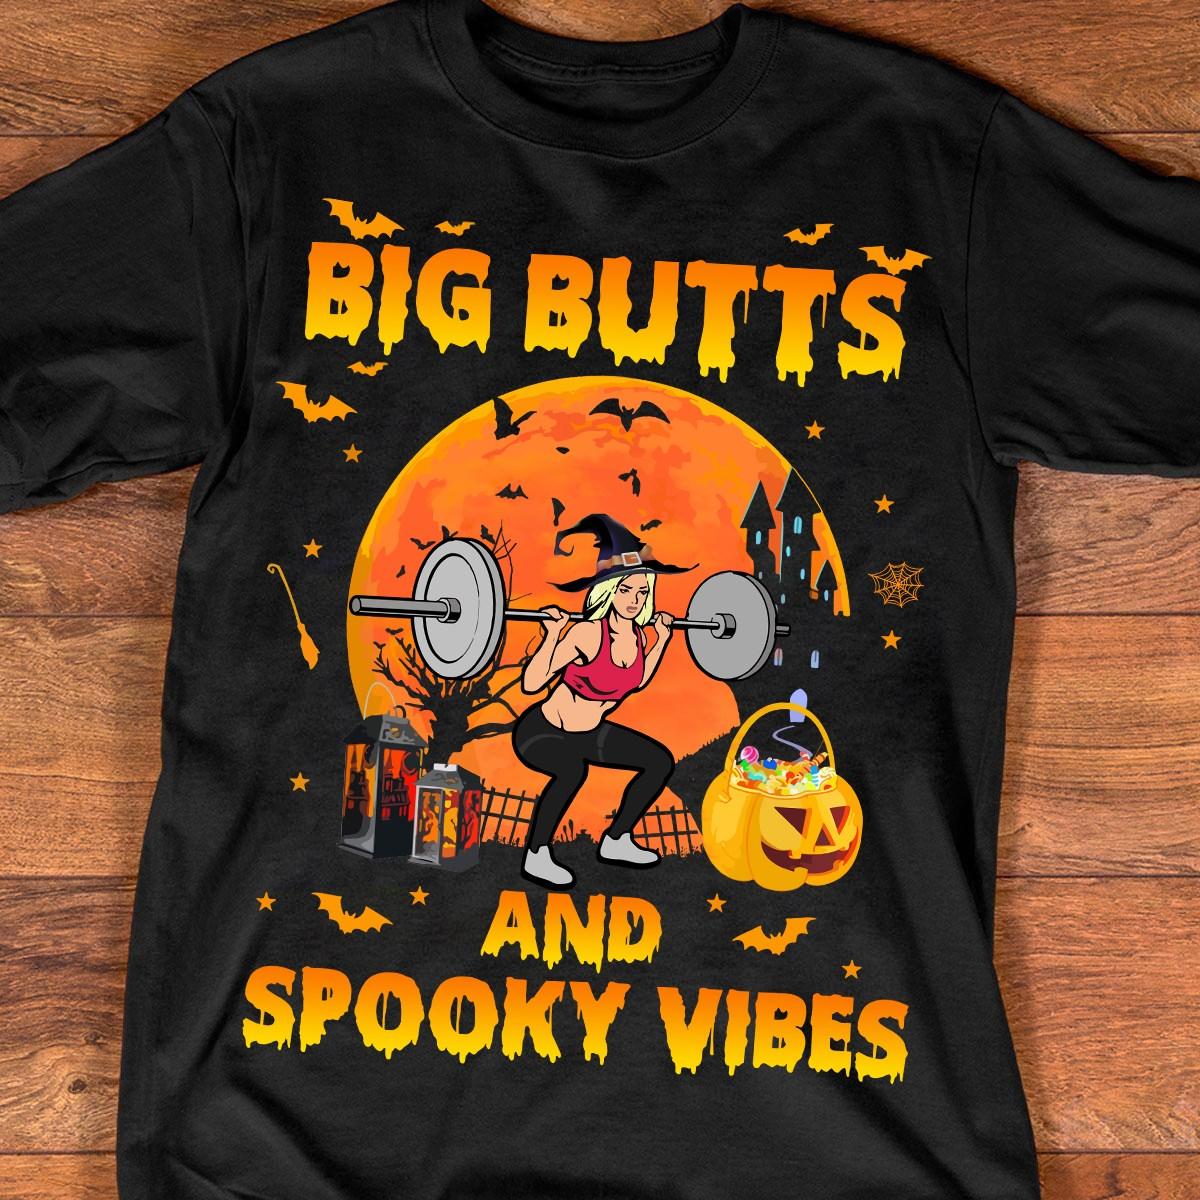 Big butts and Spooky vibes - Halloween gift for girl, girl doing squad